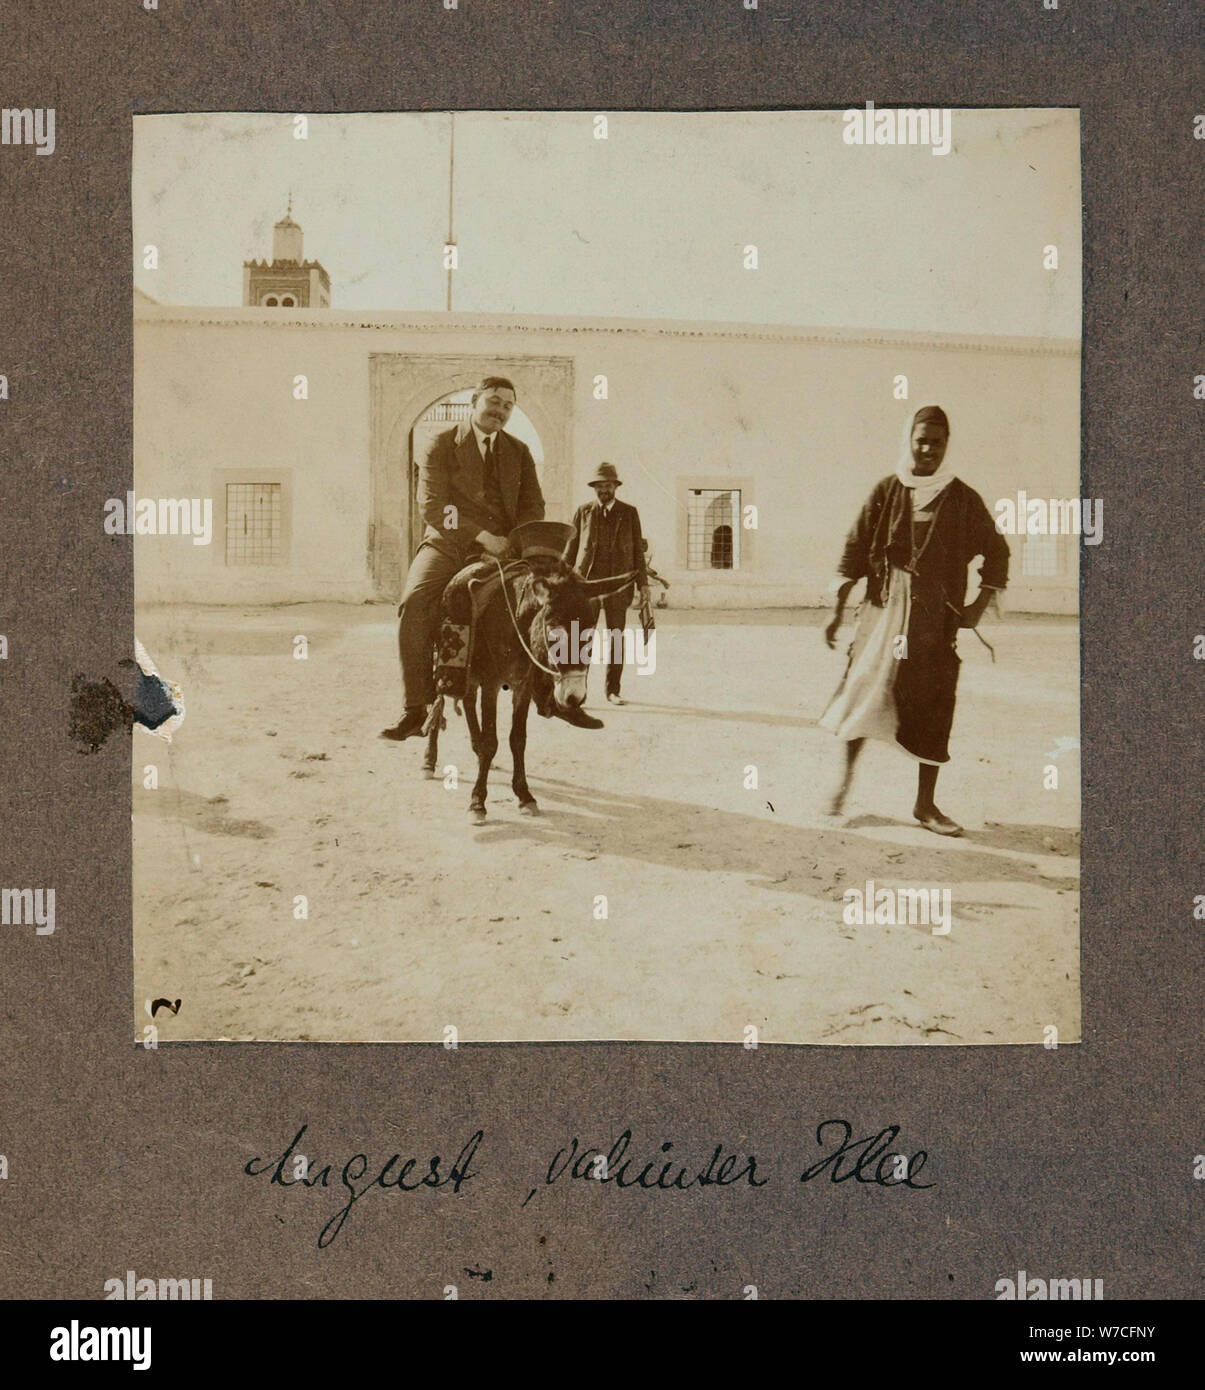 August Macke and Paul Klee in Front of a Mosque in Tunisia, 1914. Stock Photo